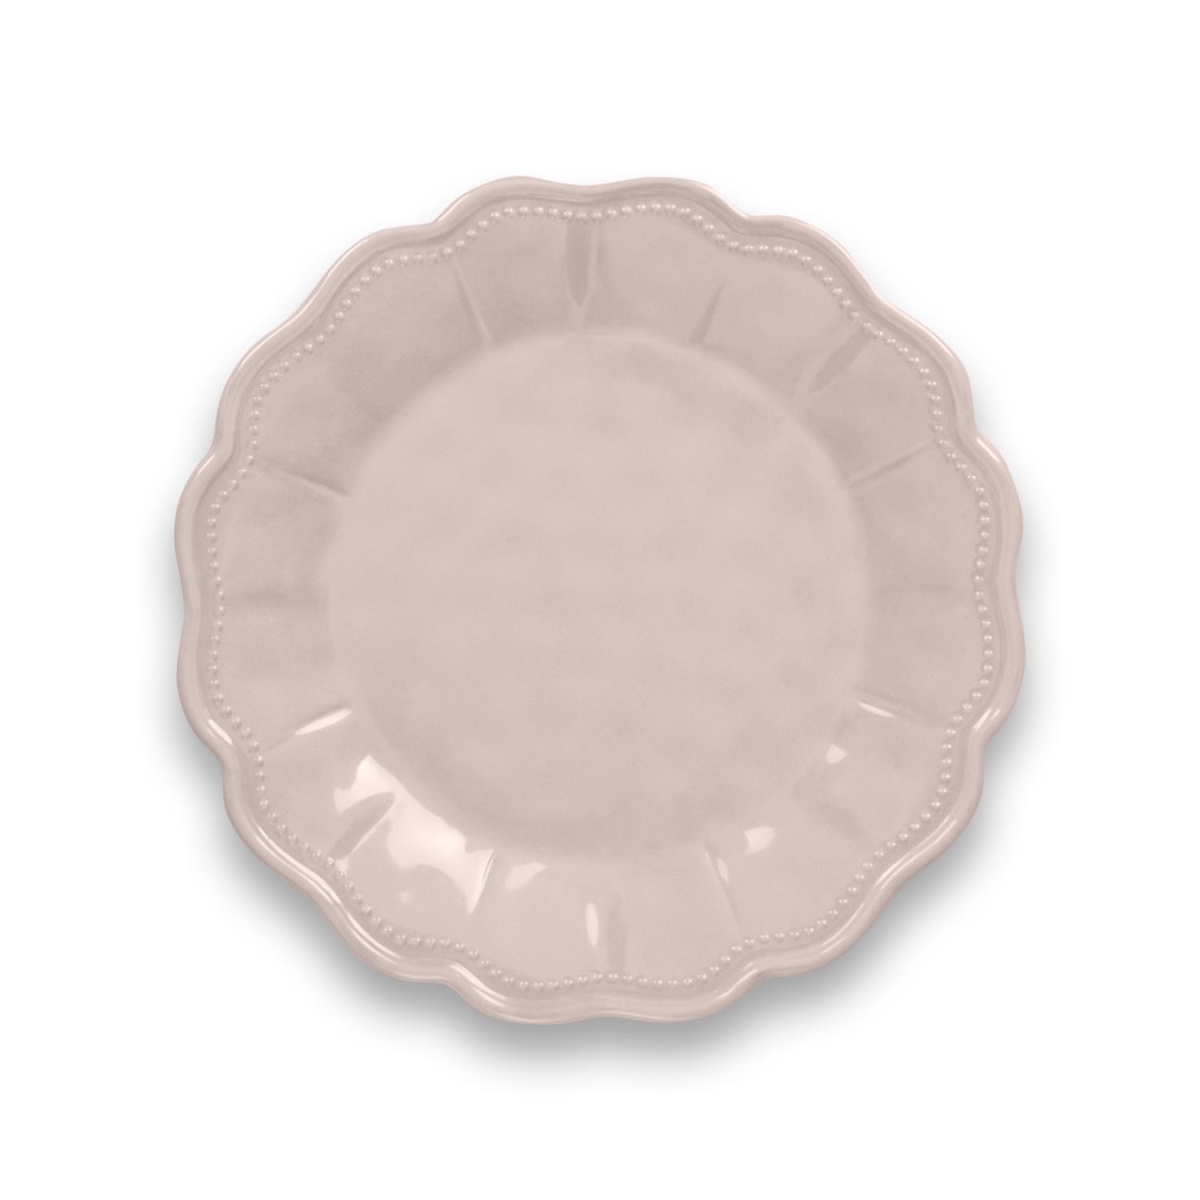 Pis1089ssppb Saville Scallop Blush Salad Plate Heavy Mold, Set Of 6 - Pearl